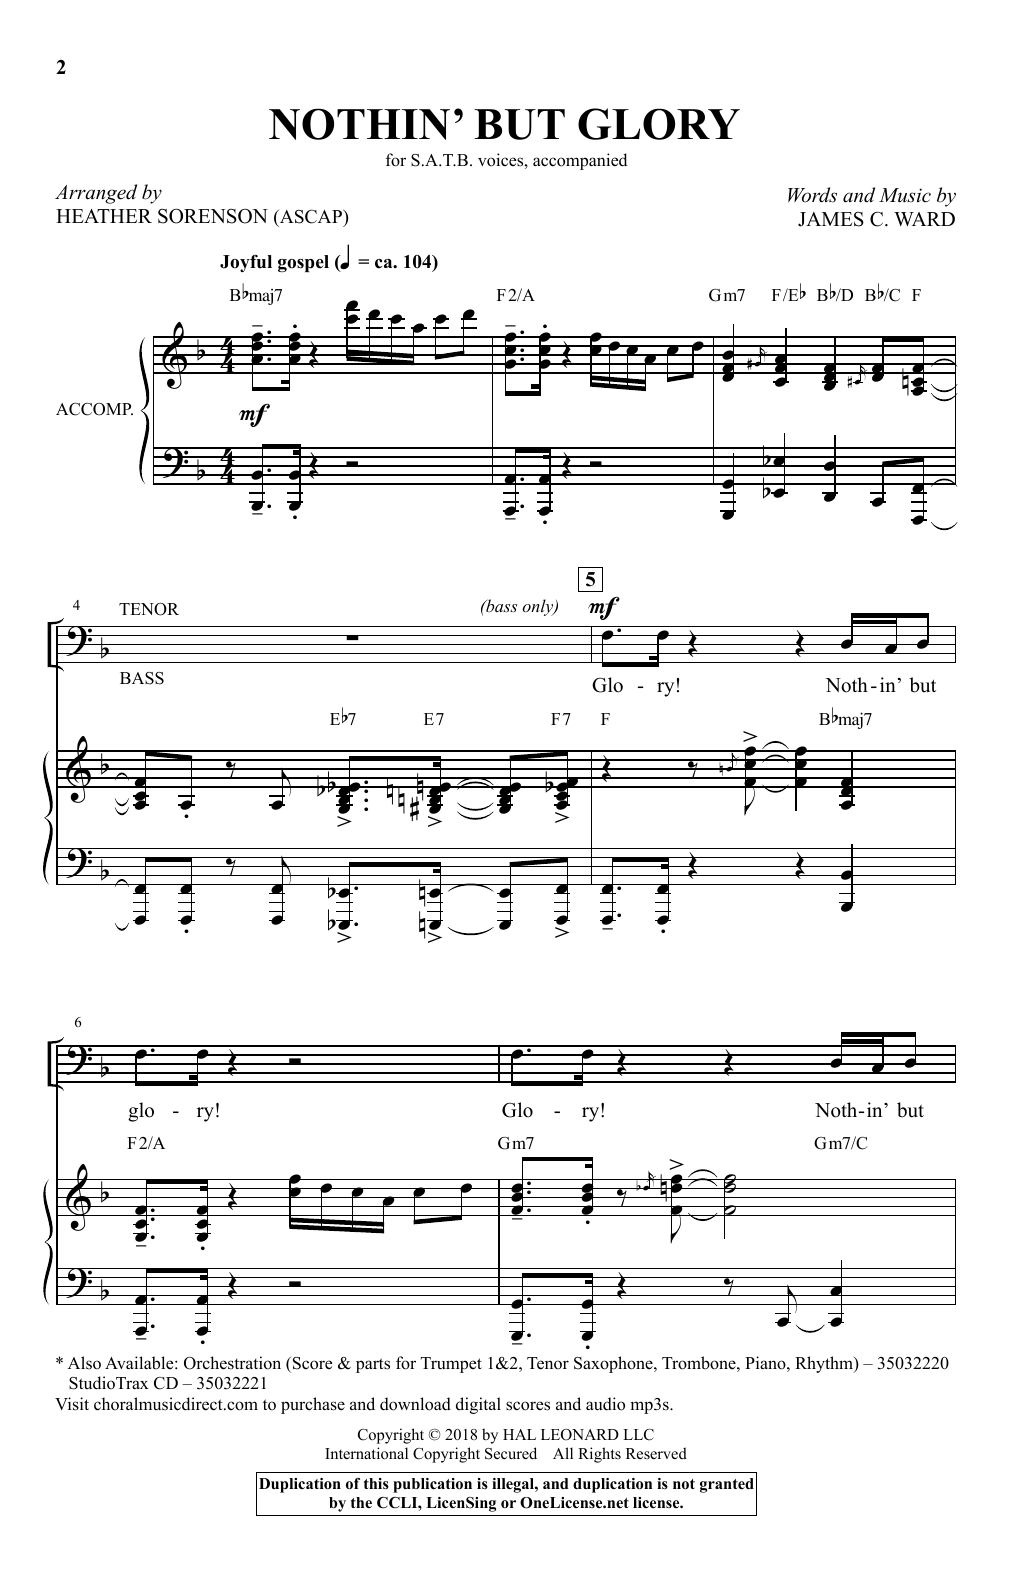 Download James C. Ward Nothin' But Glory (arr. Heather Sorenso Sheet Music